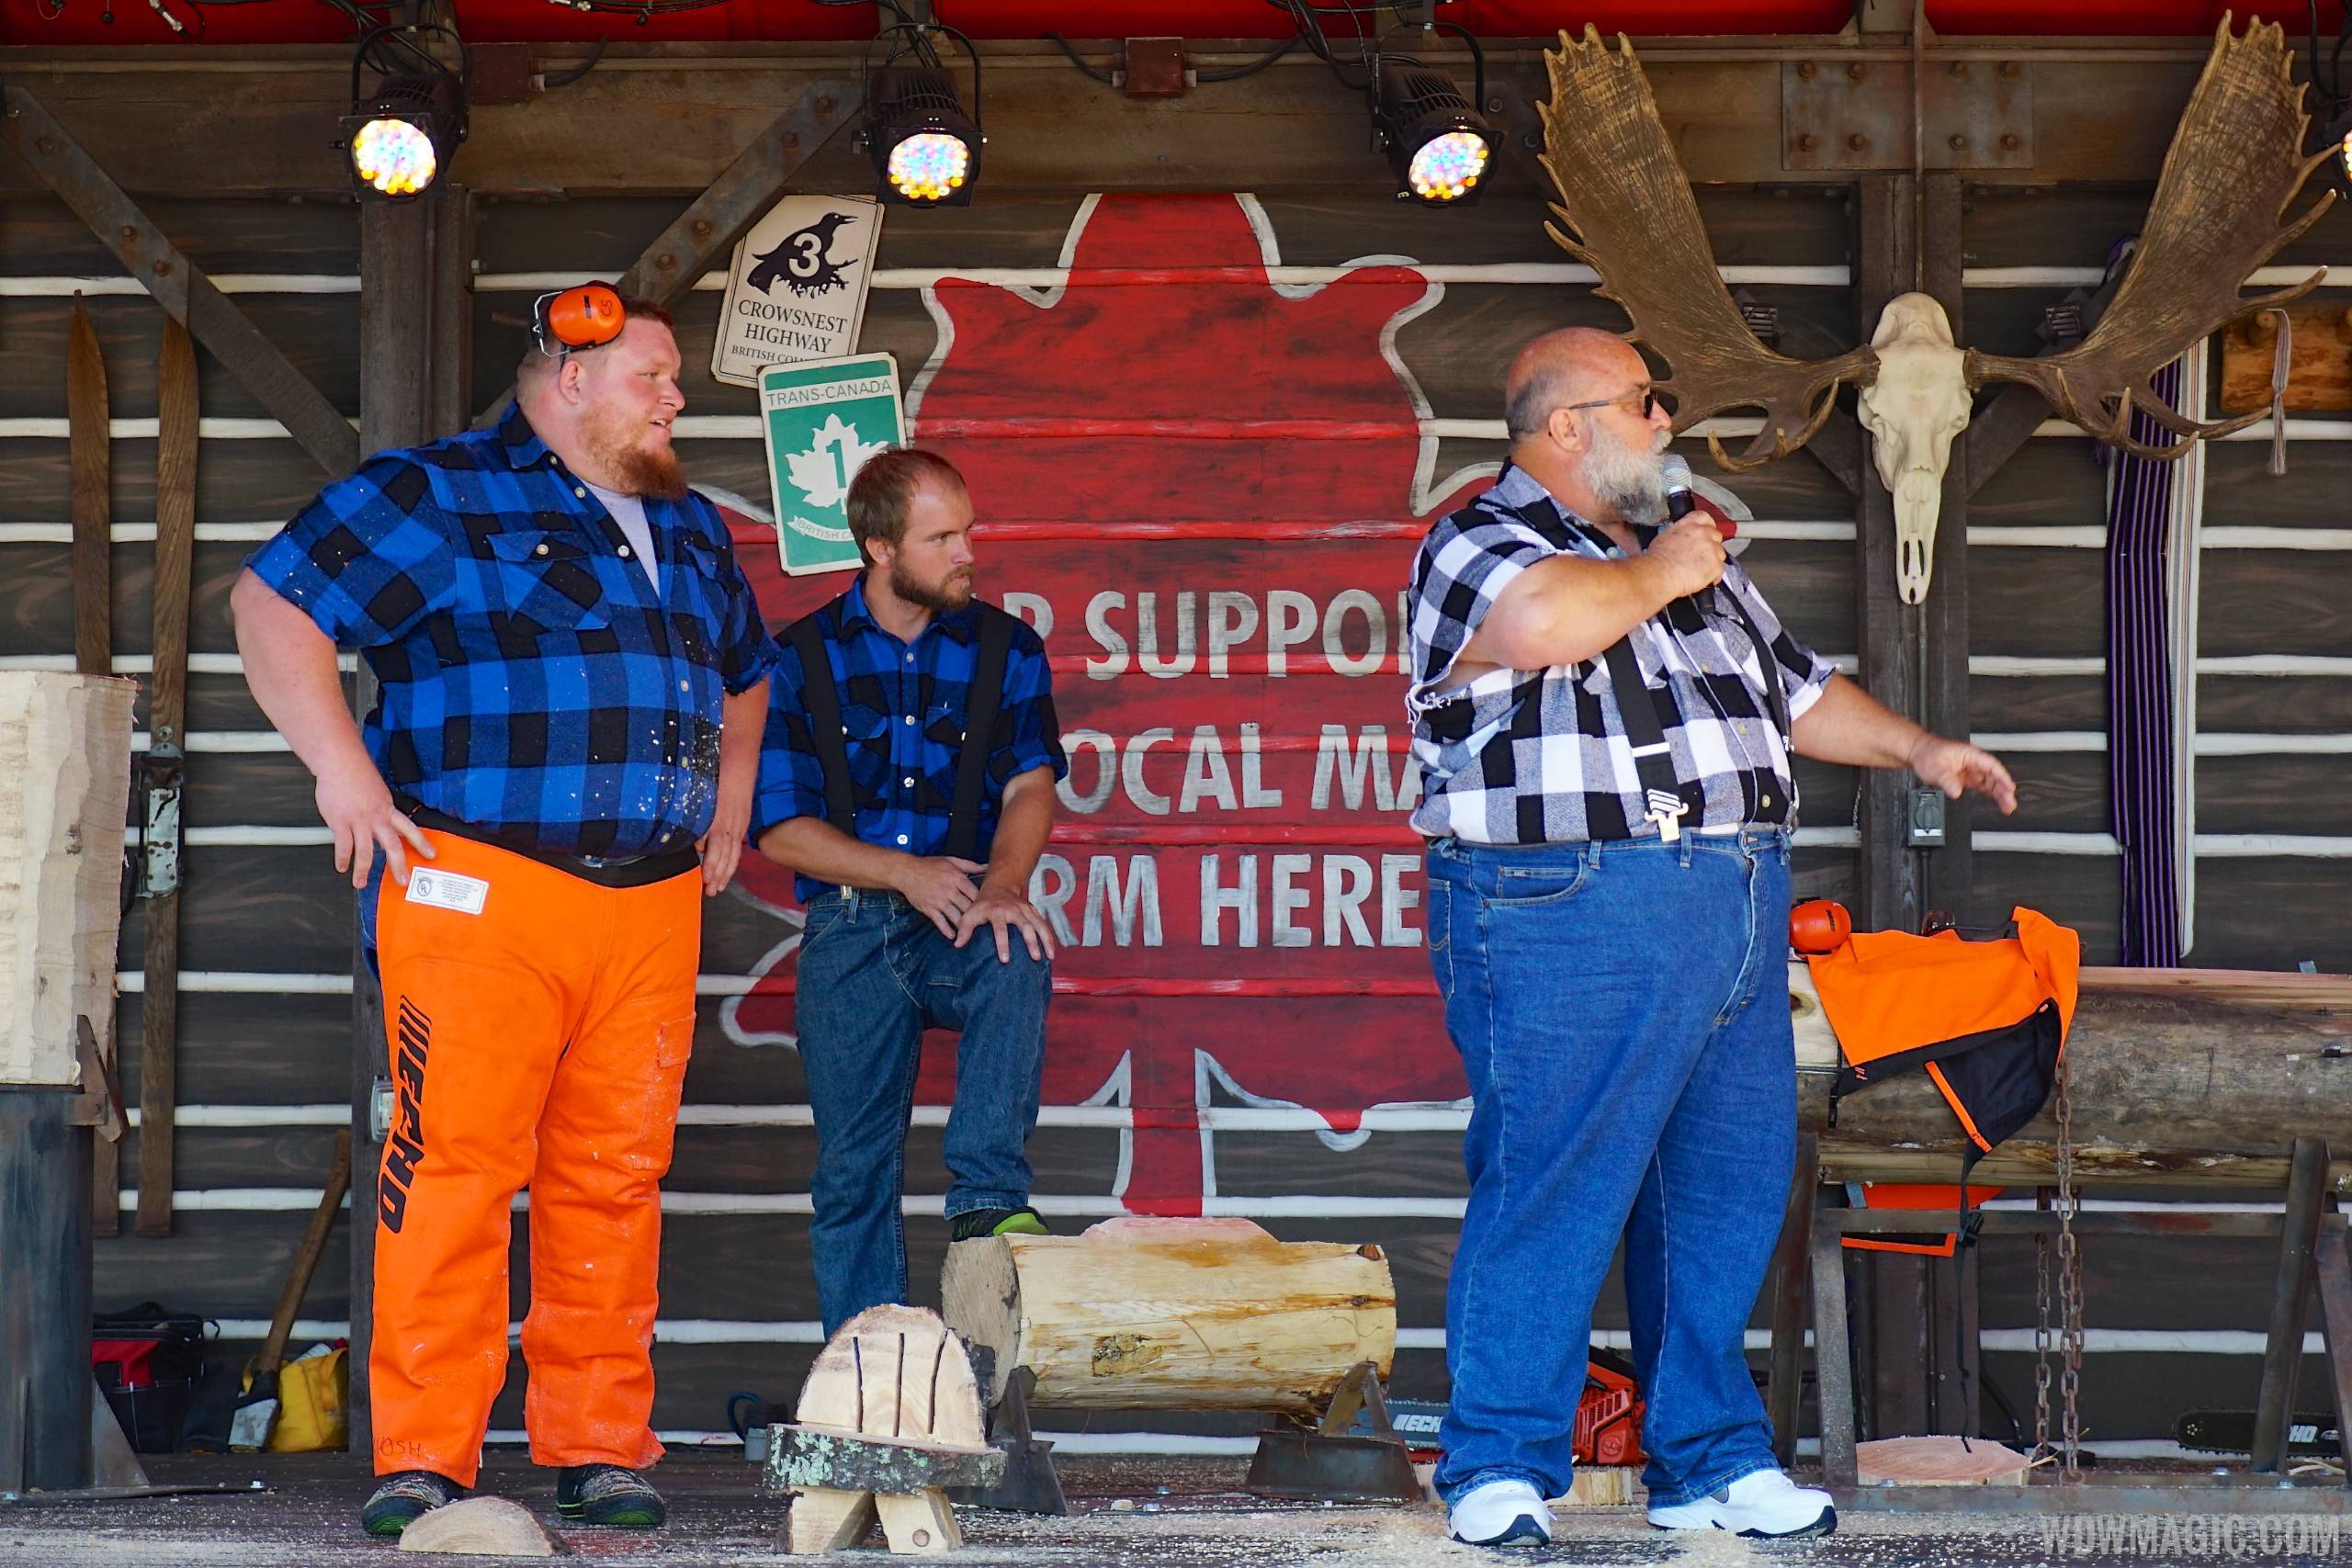 VIDEO - Canadian Lumberjack Show makes its debut performance at Epcot's Canada Pavilion